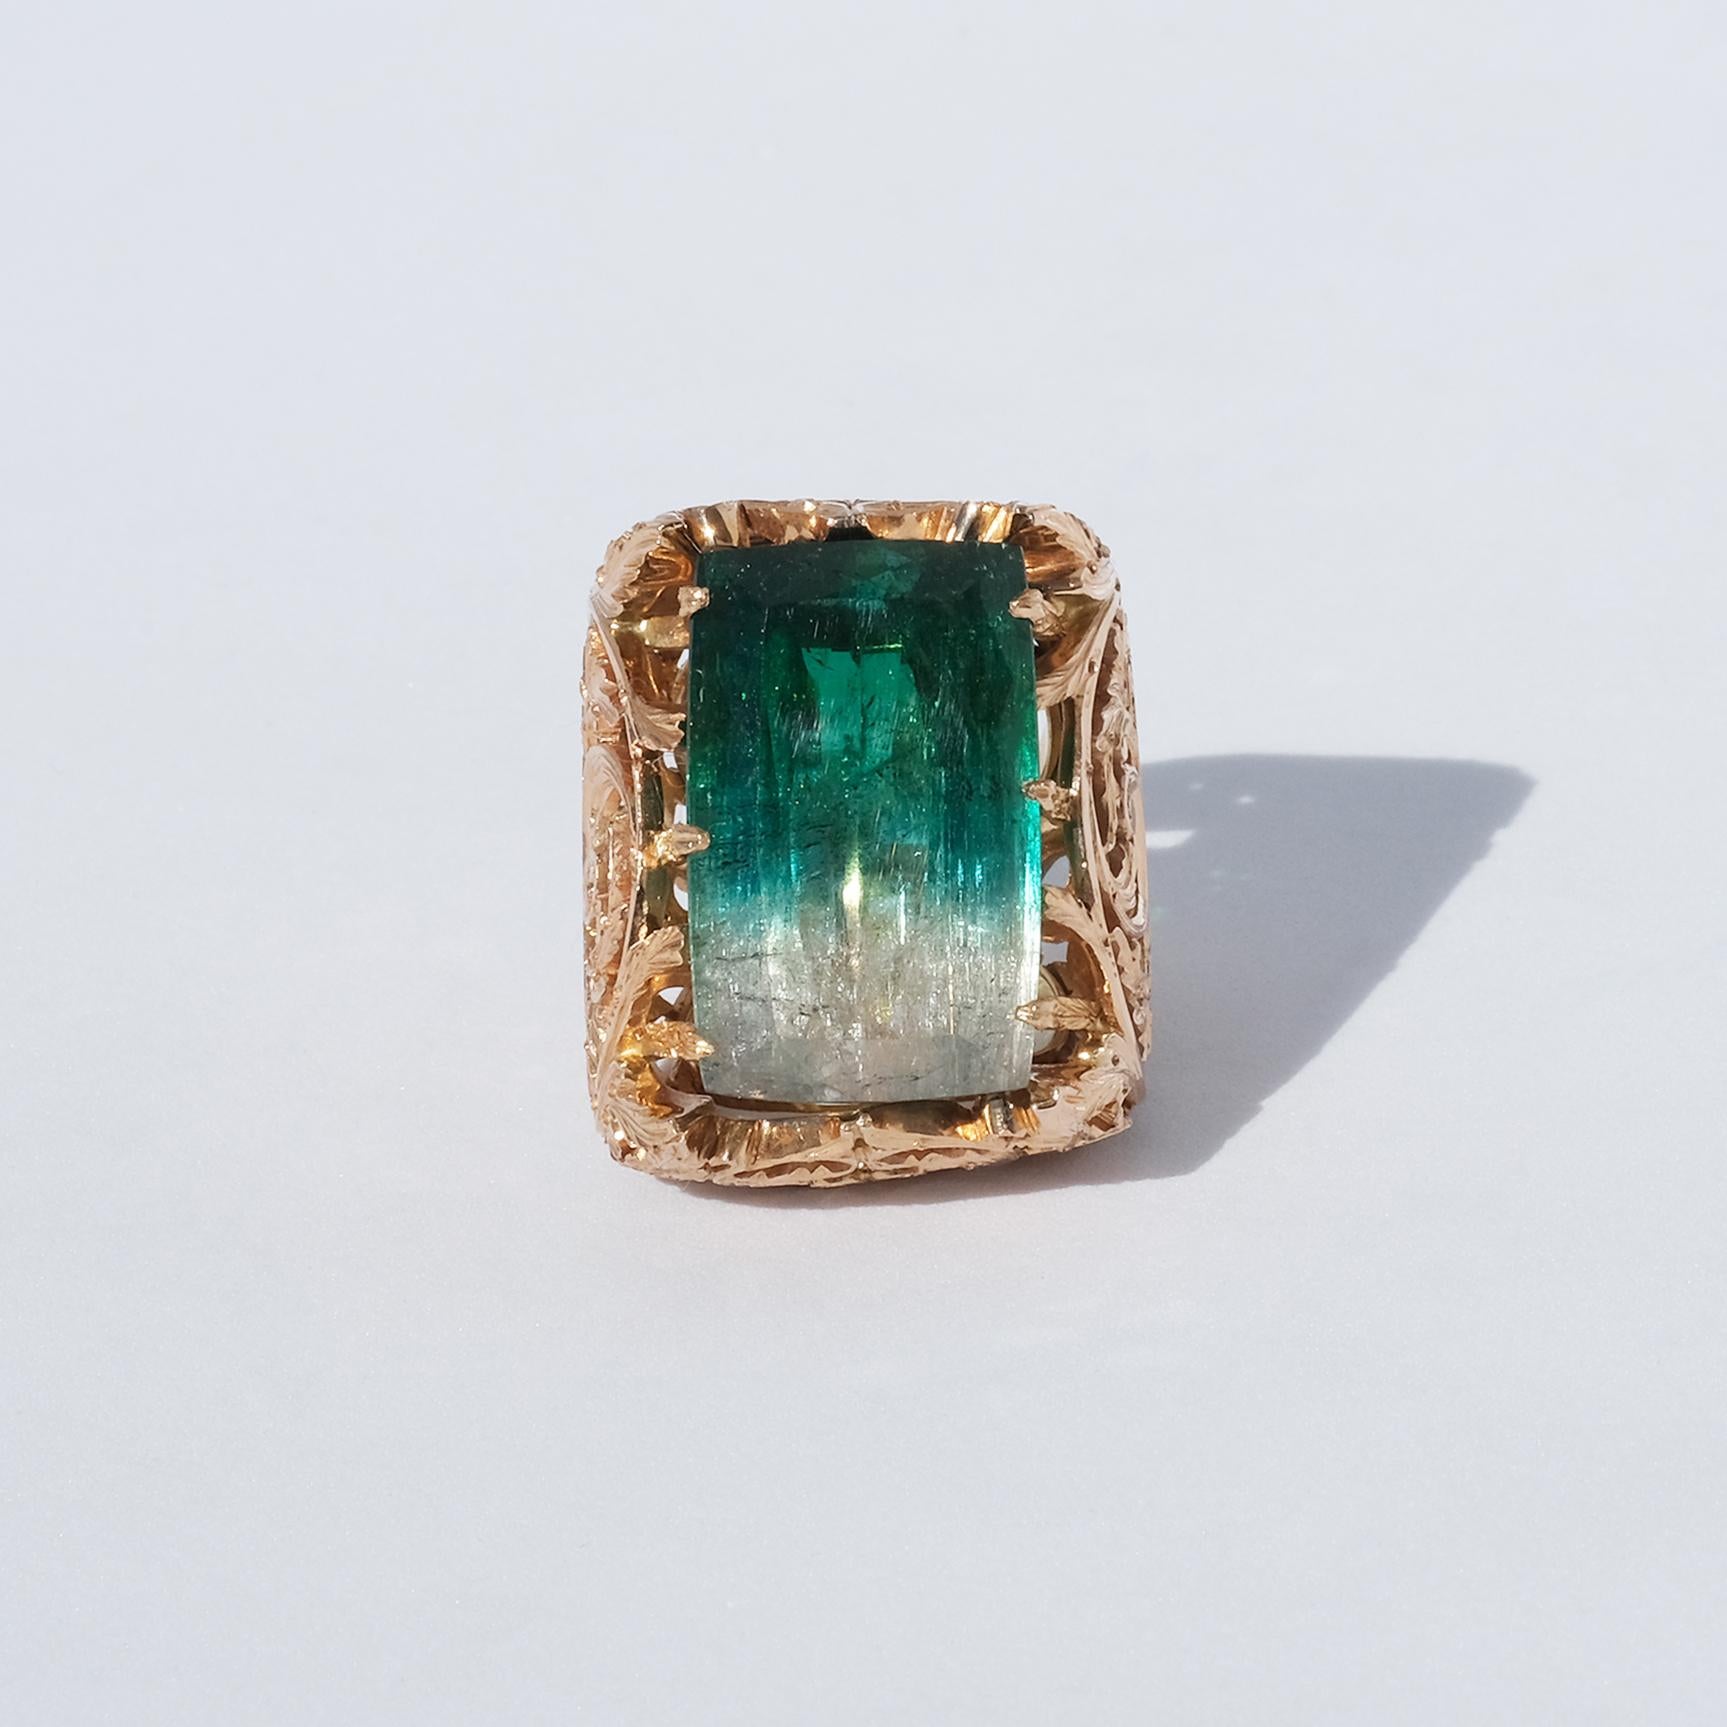 Designer: Kristina Karlsson (d. year 2000)

Year: 1990s

This amazing ring has a large stair-cut tourmaline and its 18 karat setting is adorned with a beautiful rocaille pattern. The quality of the chiseling of this ring is extraordinary.

The